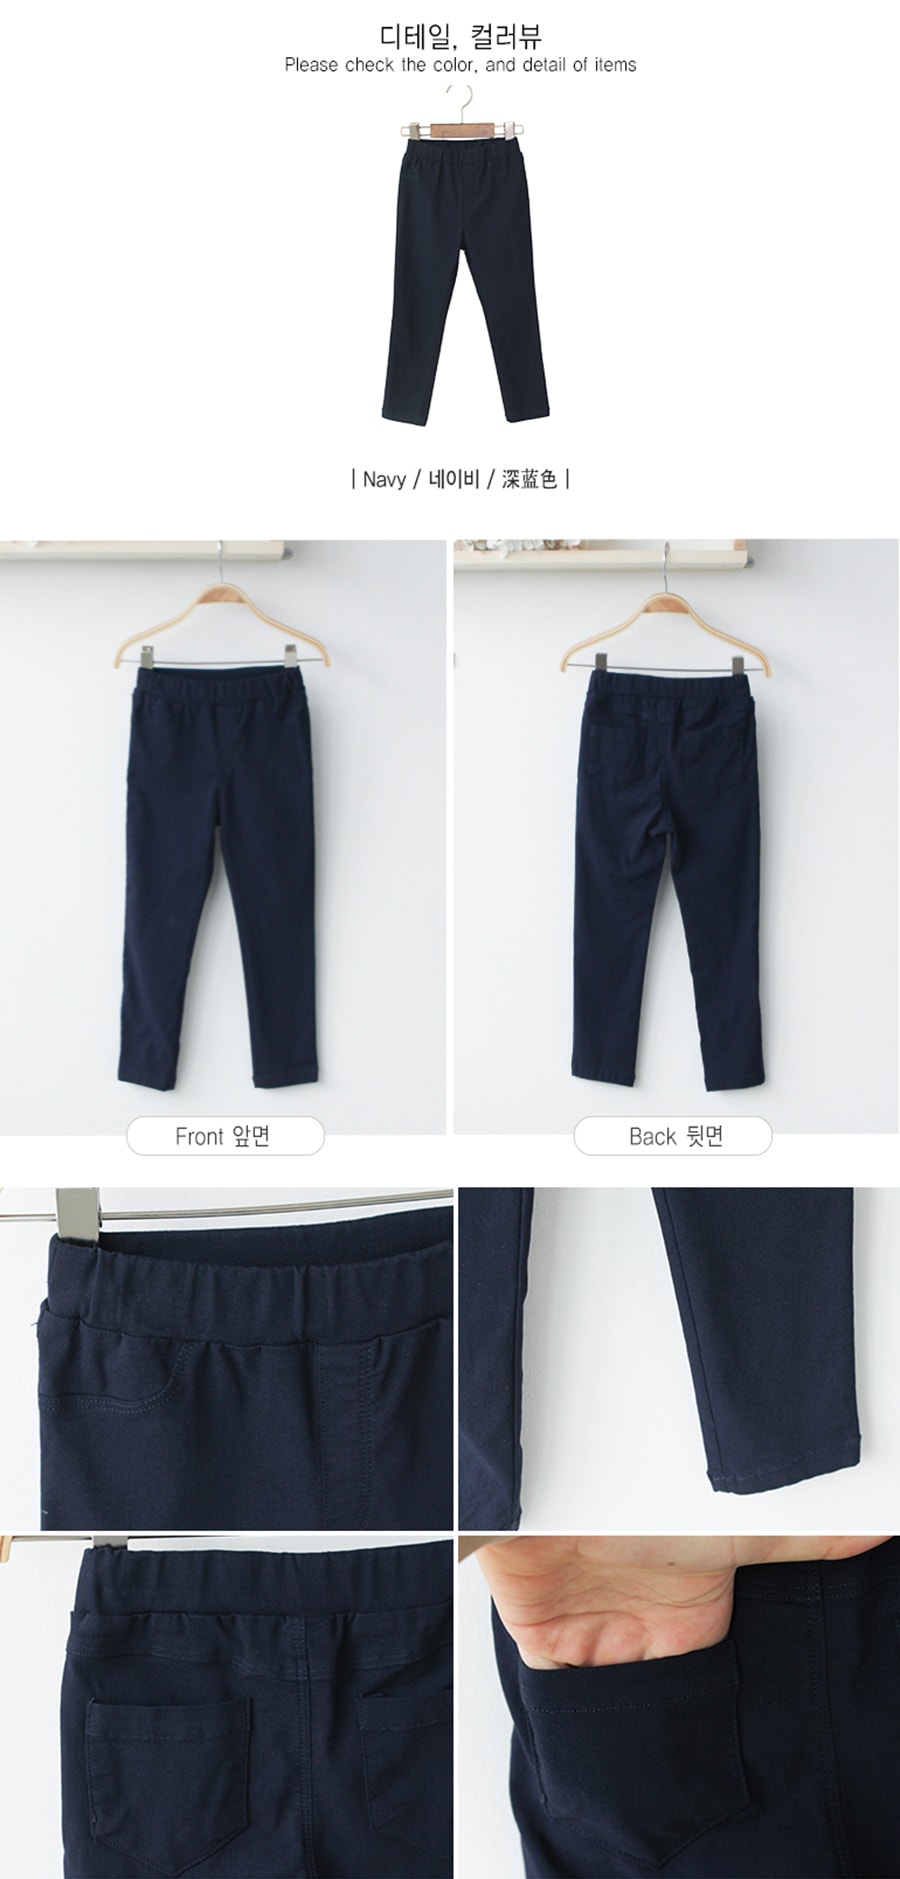 Kid Girl Pull-On Stretch Pants #Navy Size JM(8-9 years)